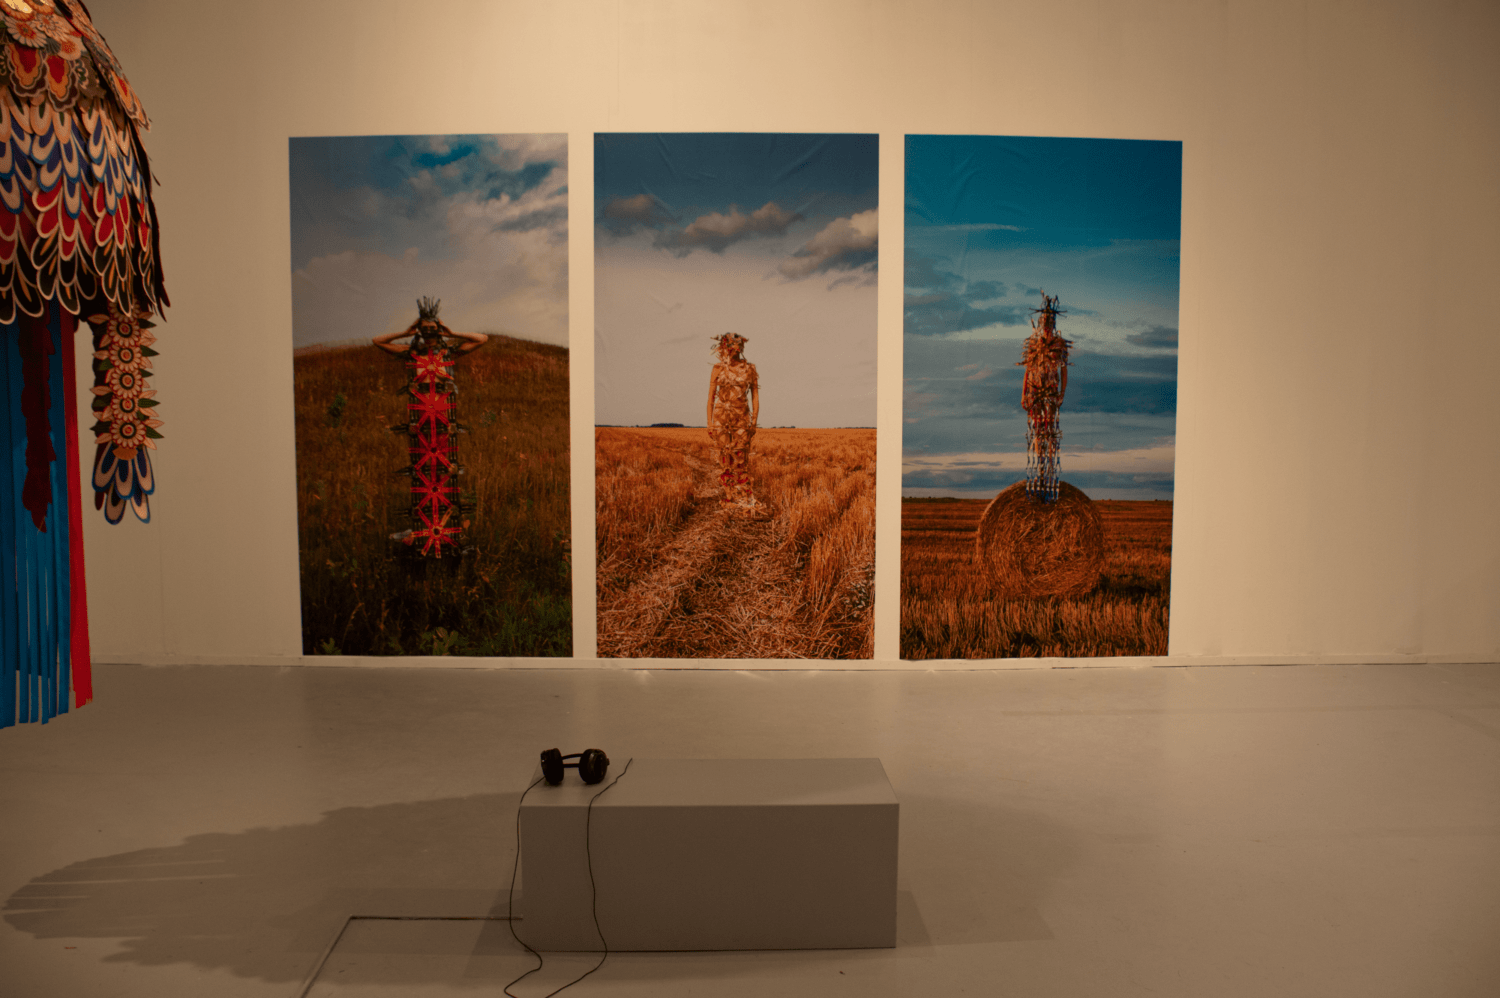 3 images on a gallery wall featuring a figure.